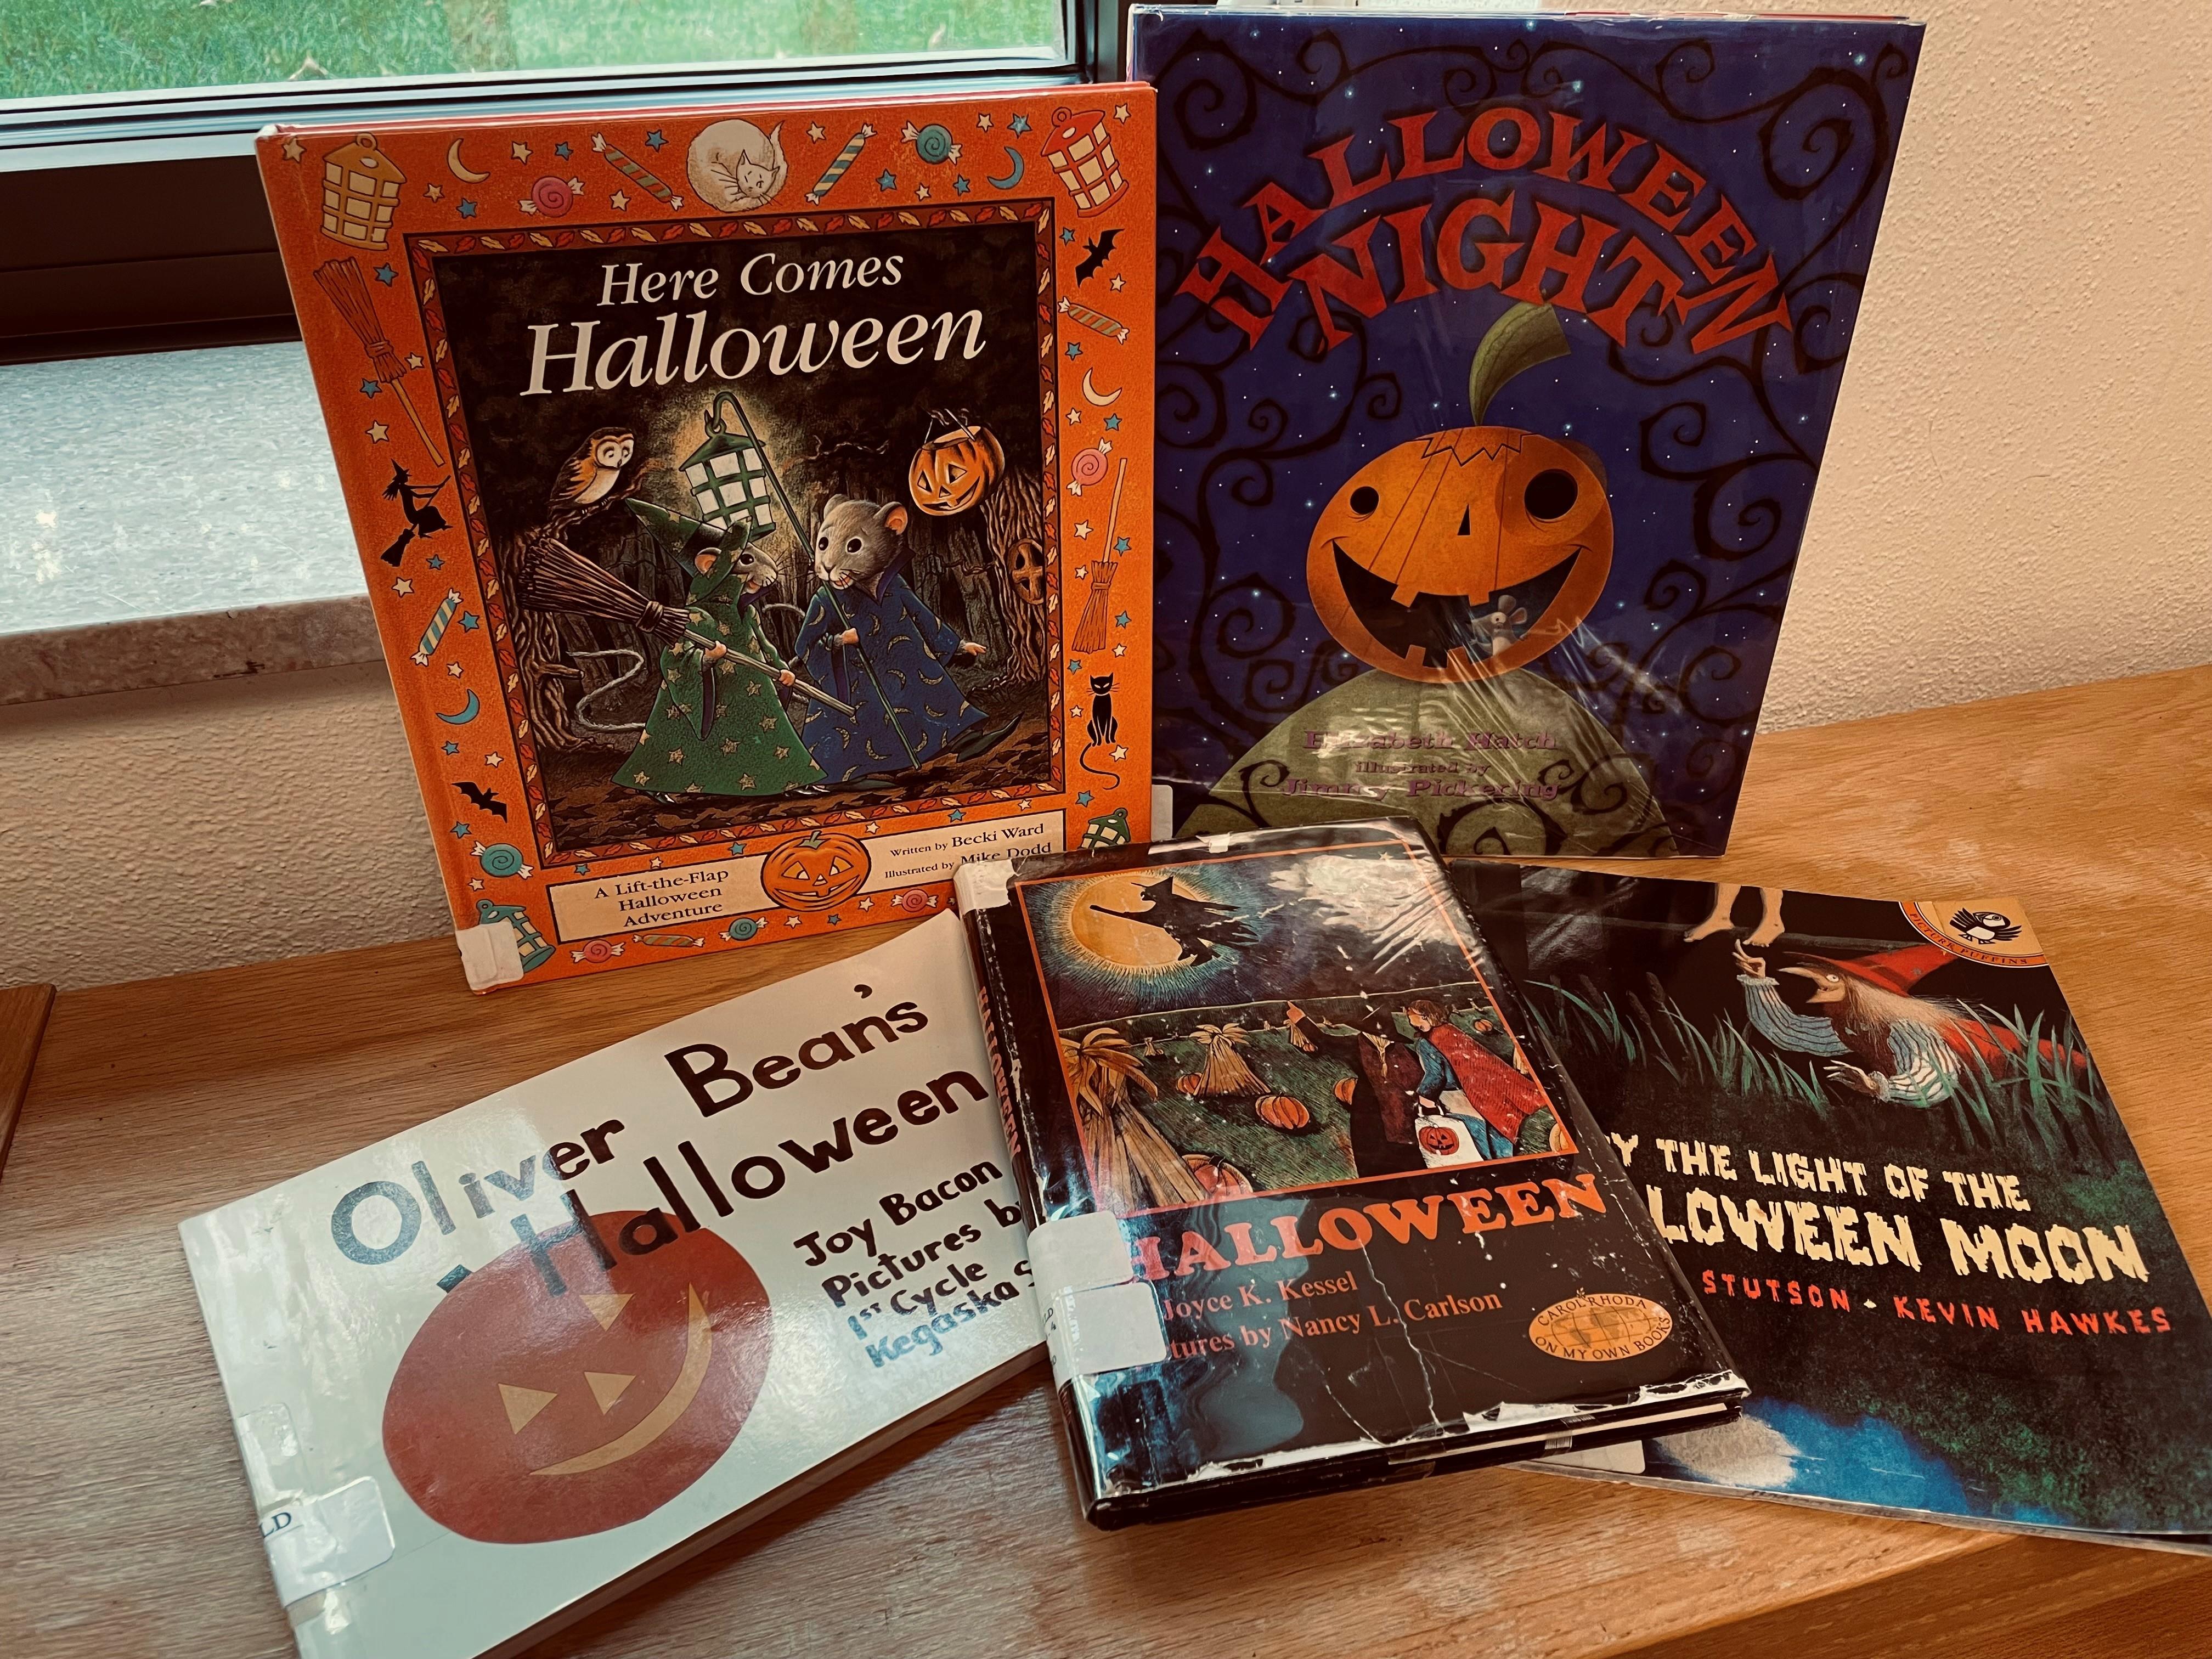 Halloween books from the library's children's collection